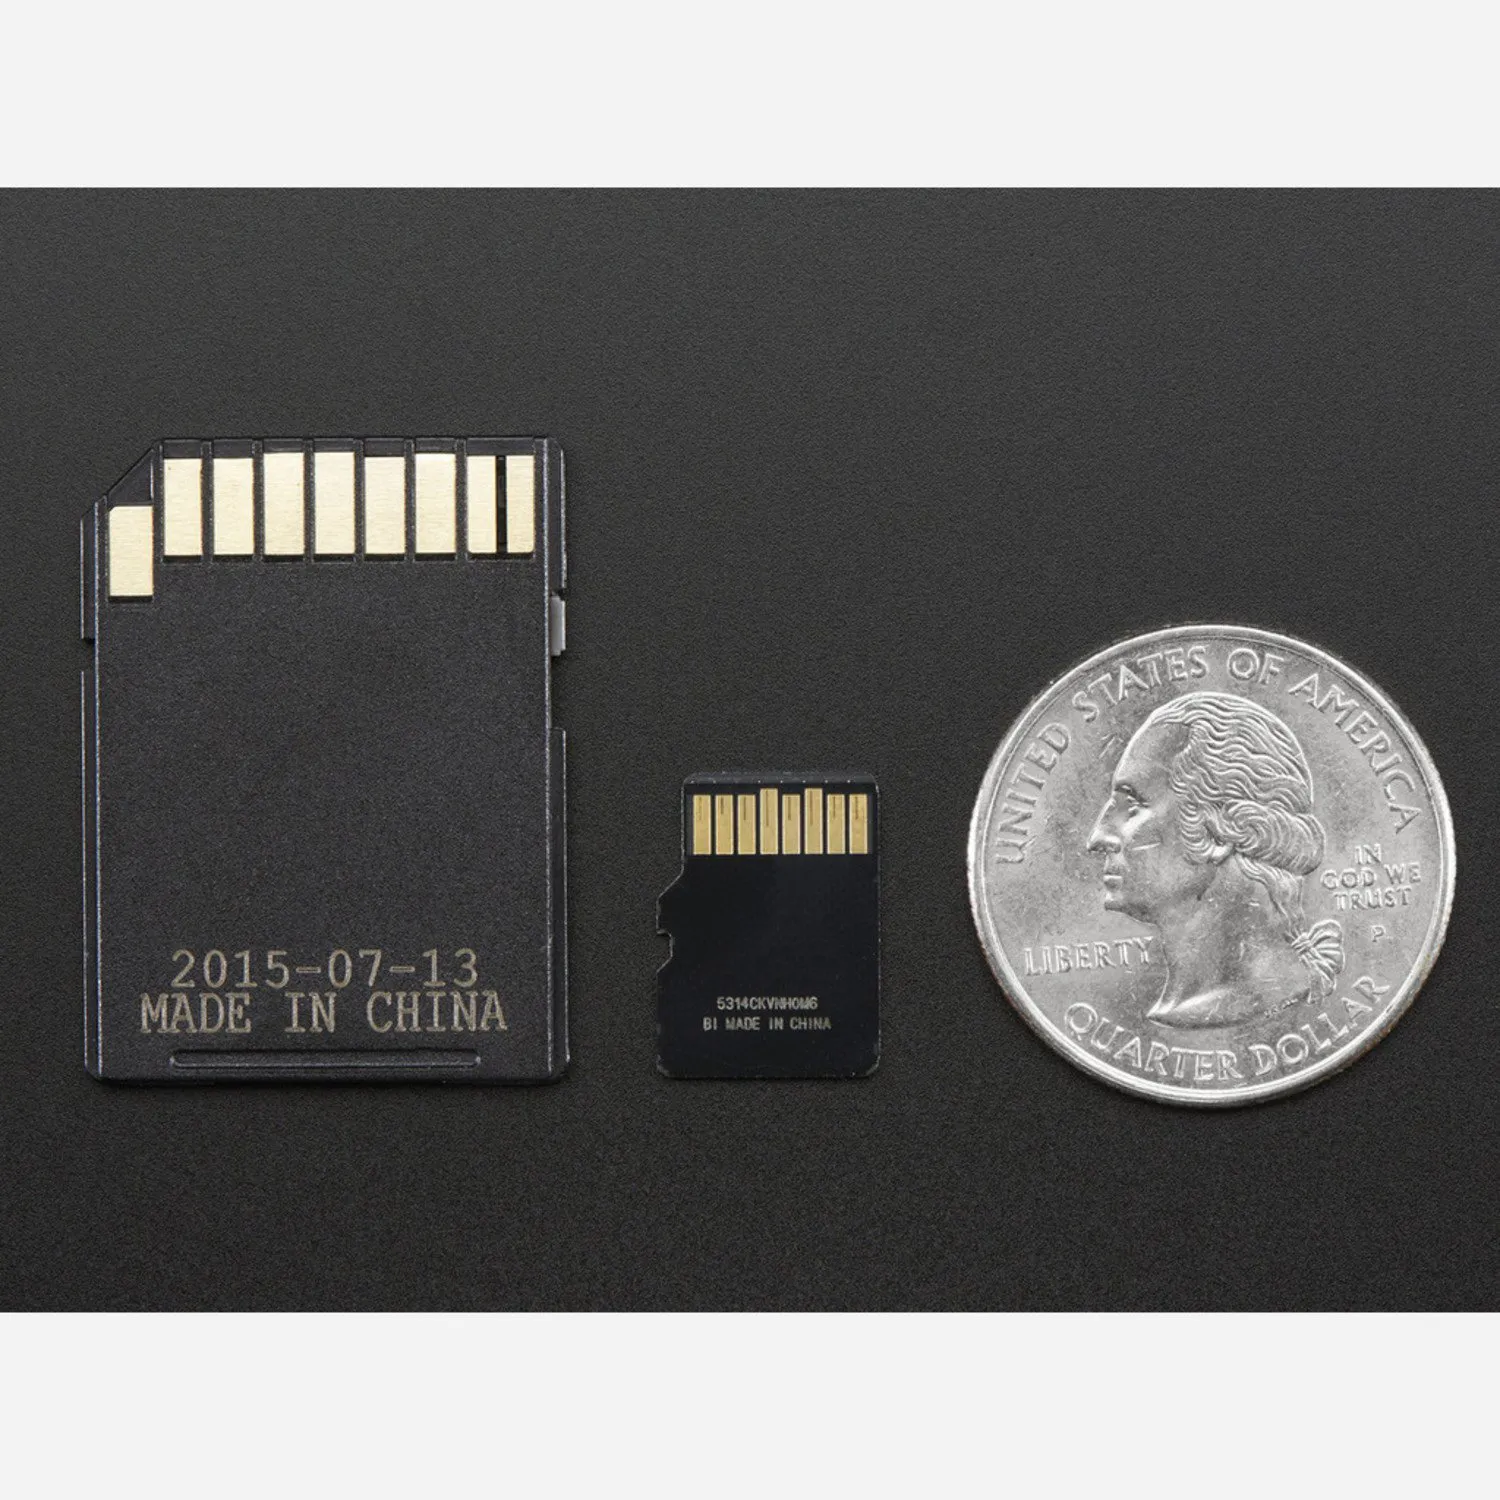 Photo of 8GB Class 10 SD/MicroSD Memory Card - SD Adapter Included